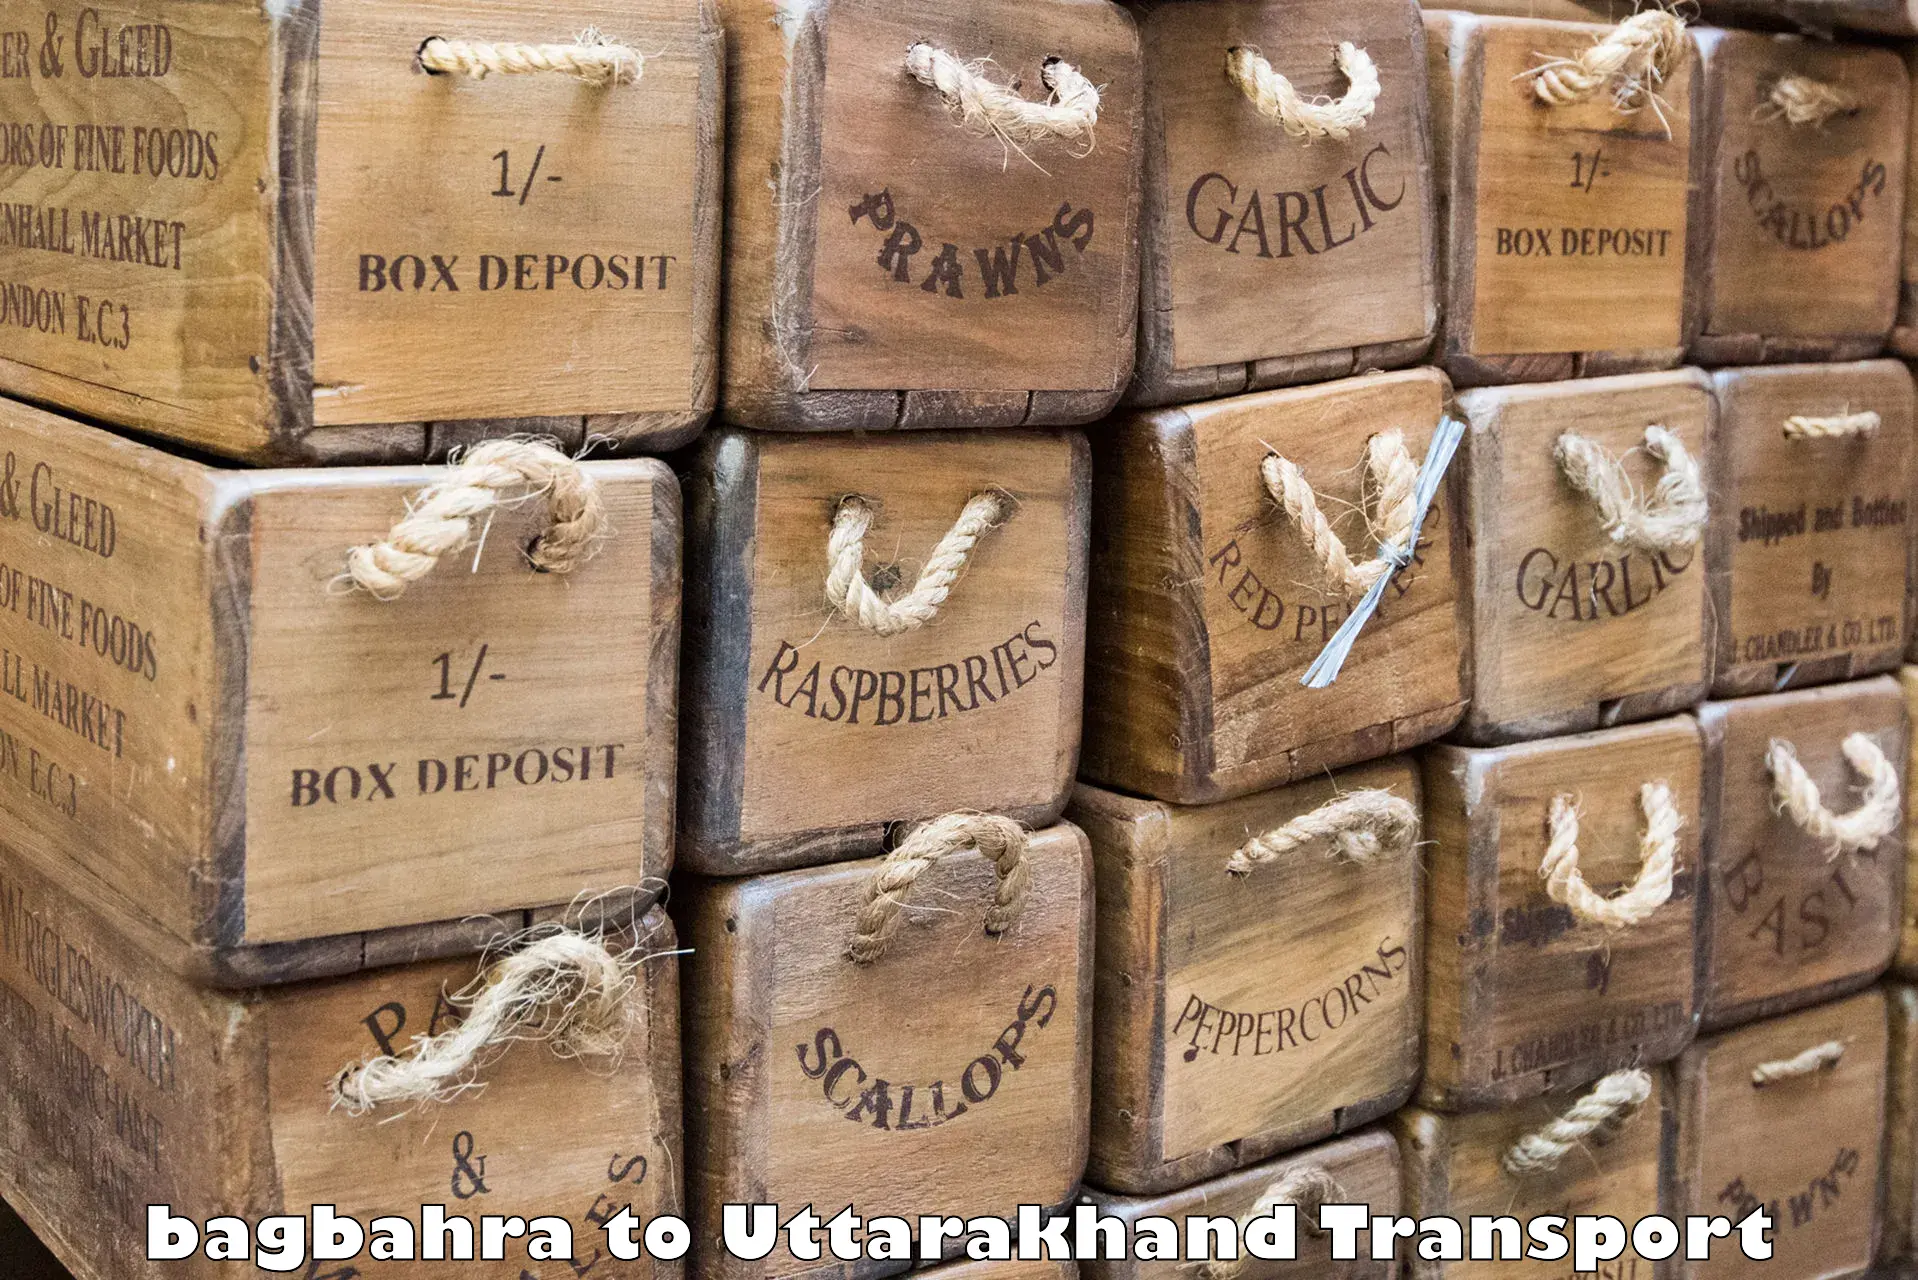 Container transport service bagbahra to Nainital